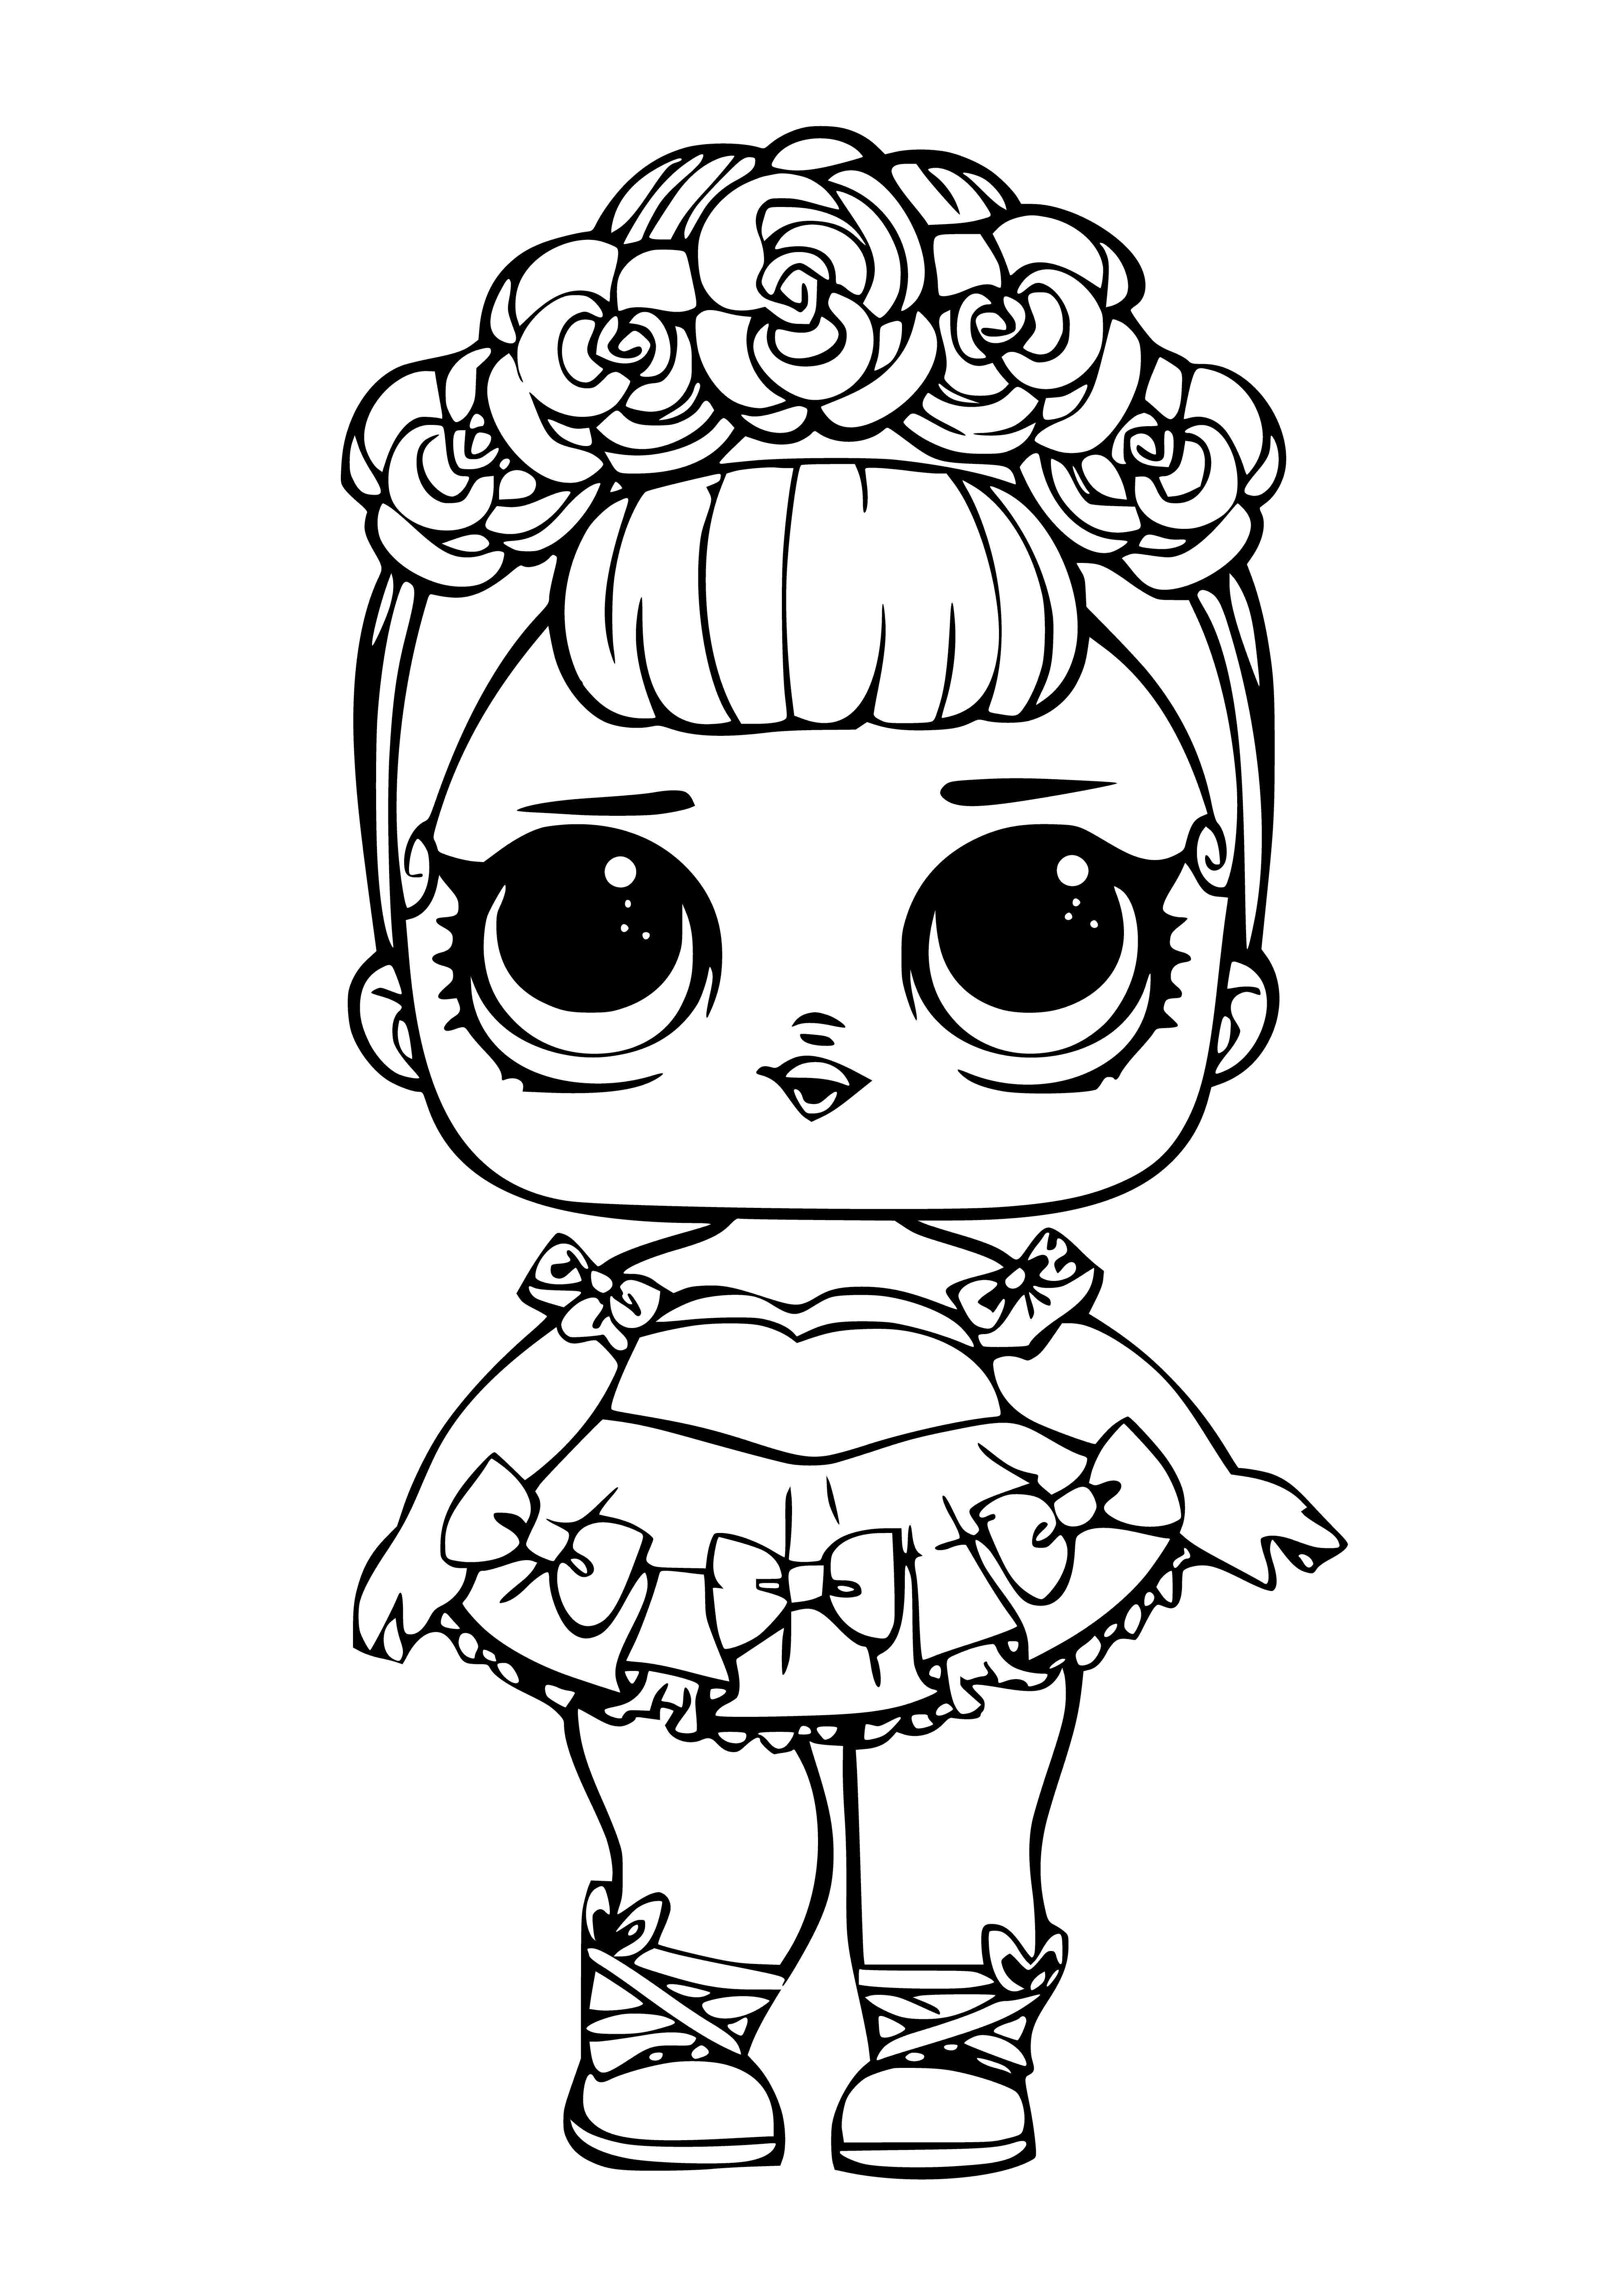 coloring page: A sparkly pink & purple glitter crown w/ gems in center, surrounded by hearts, stars & shapes. Above: "Sugar Queen", below: "Shiny".